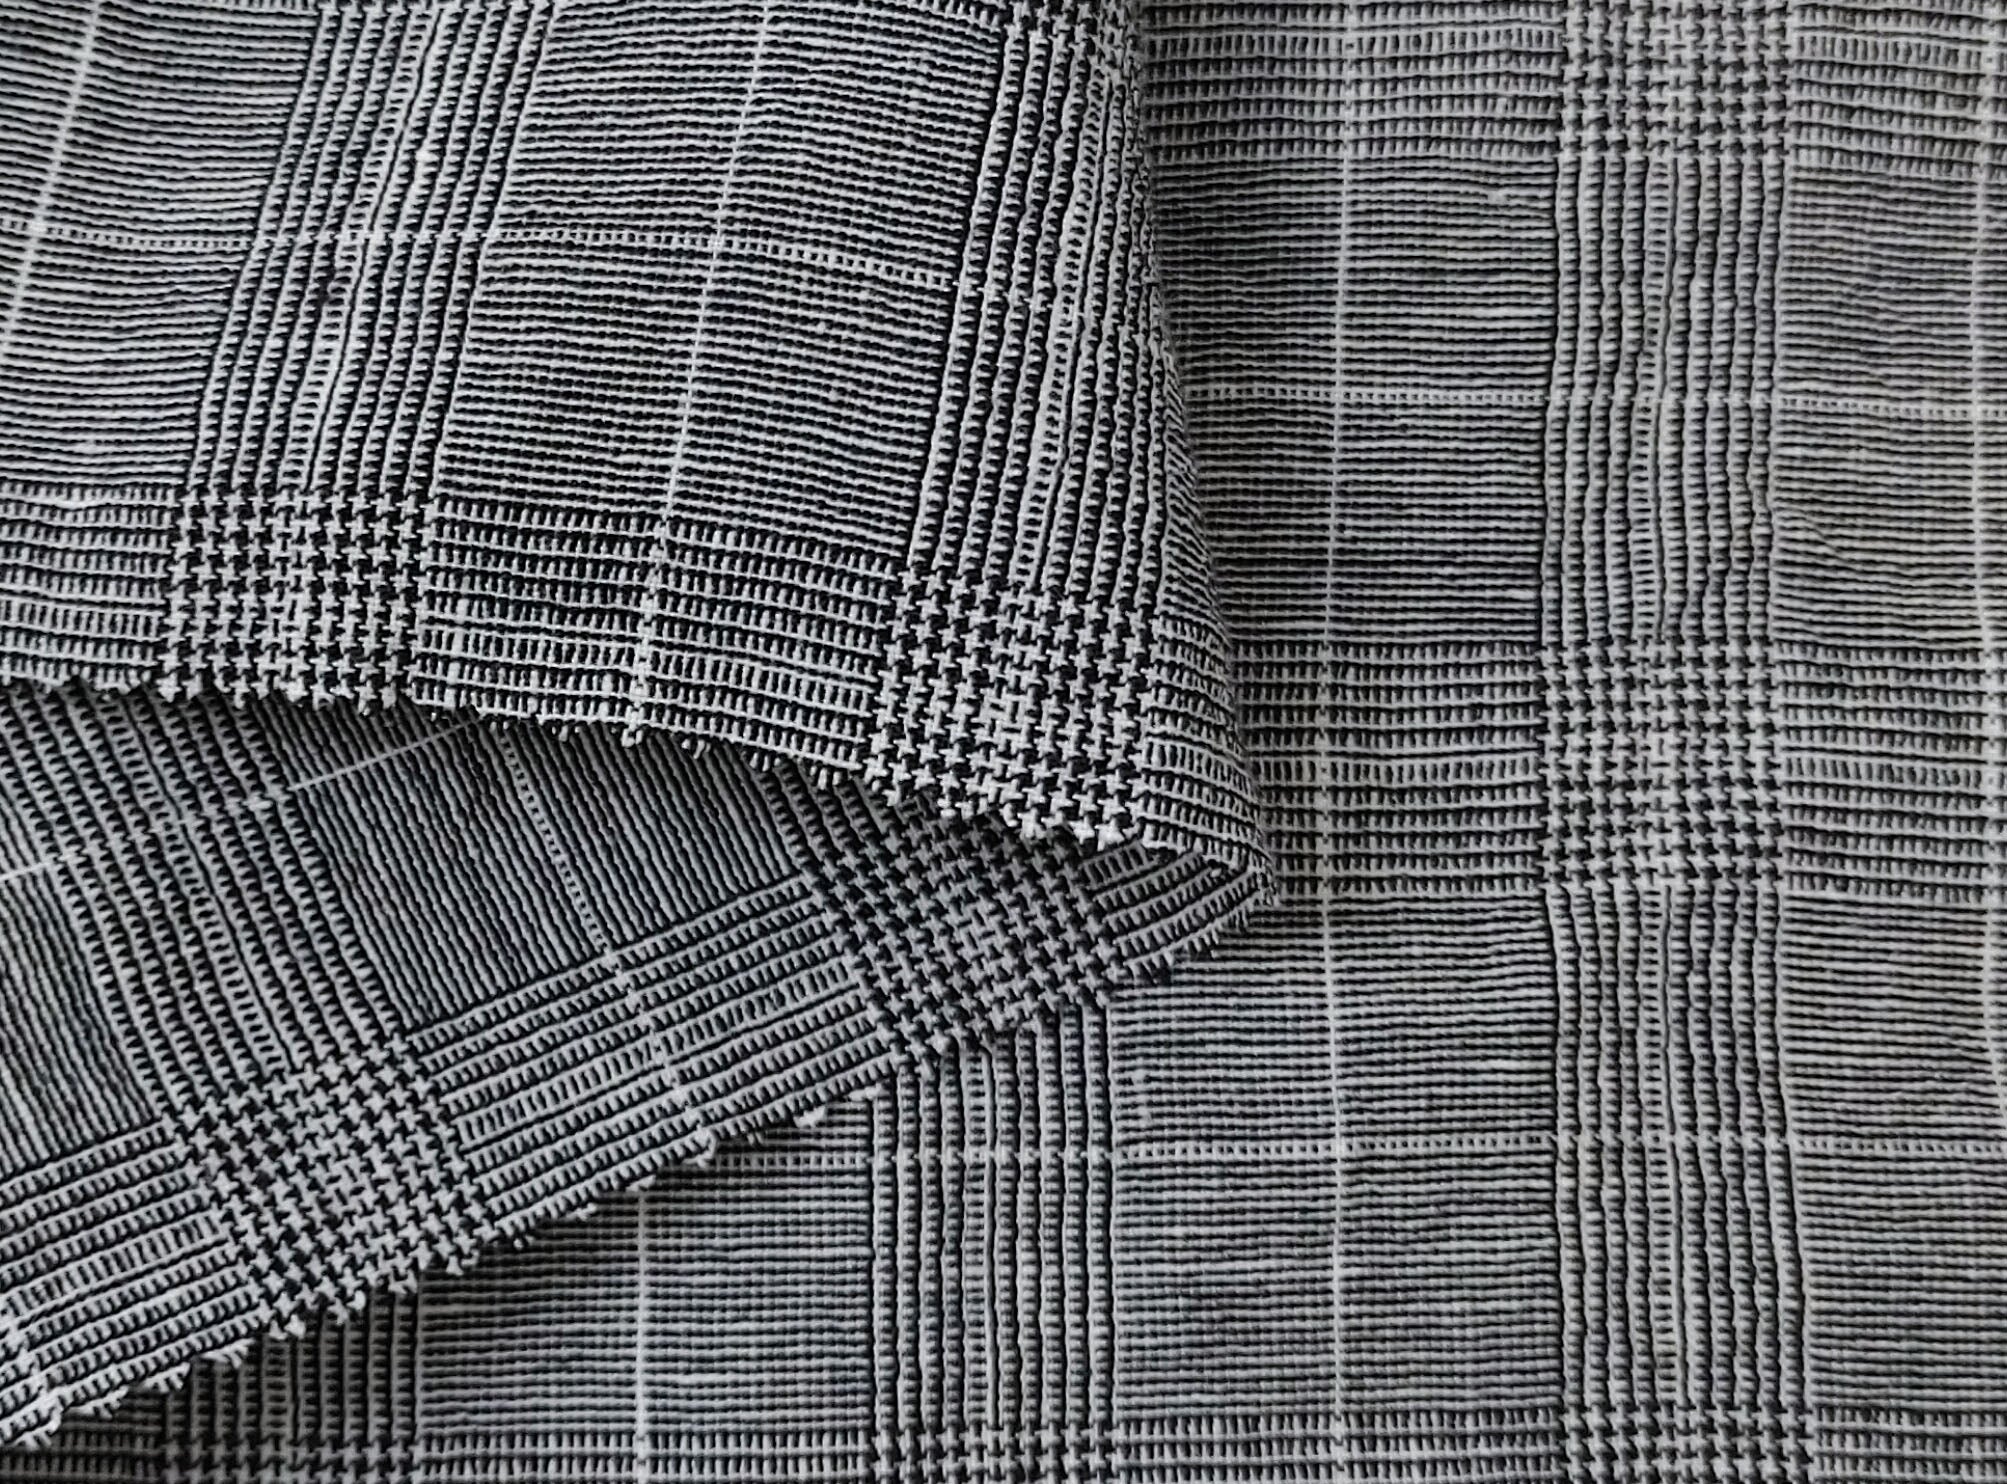 Linen Ramie Rayon Glen Plaid Fabric: A Symphony of Elegance with High Twisted Yarns 6070 - The Linen Lab - Black